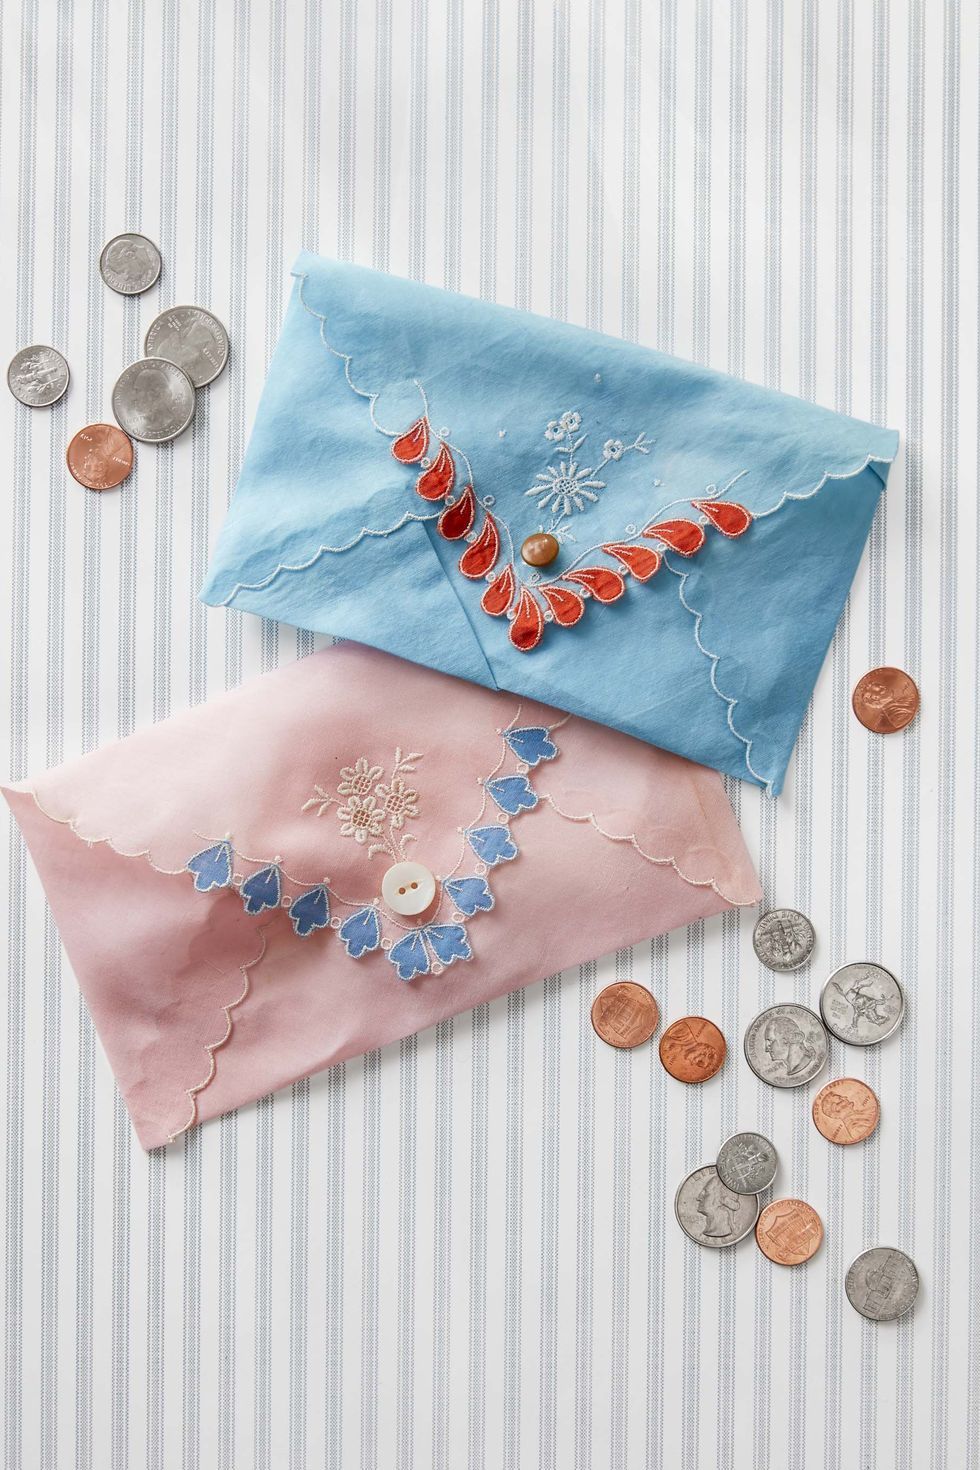 one coin purse in blue and one in pink